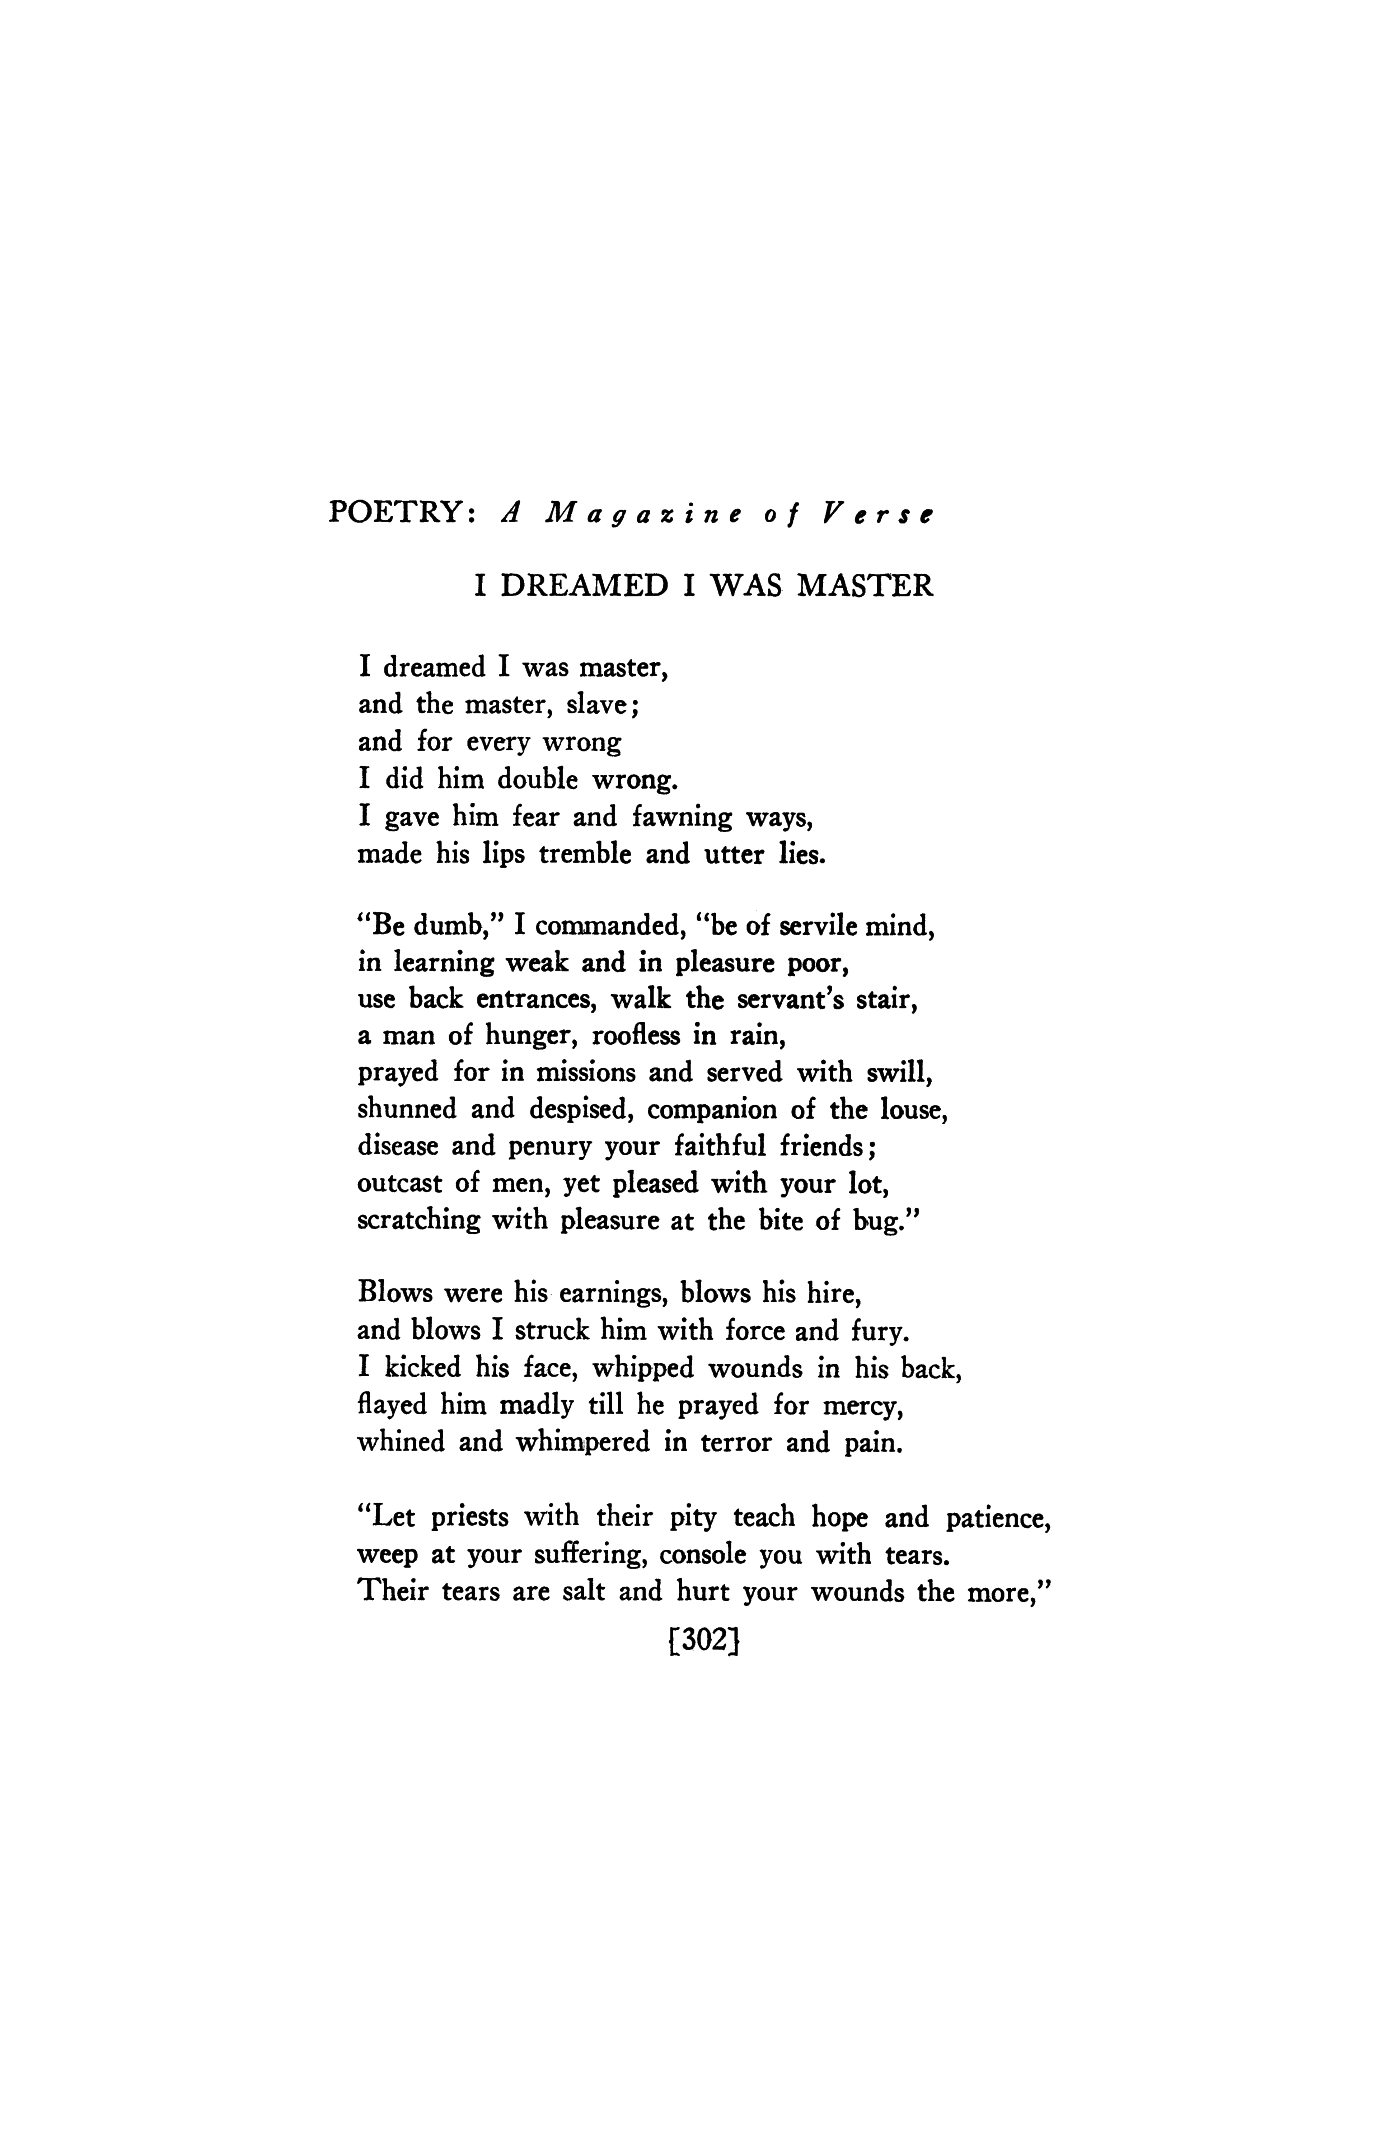 https://static.poetryfoundation.org/jstor/i20581242/pages/8.png